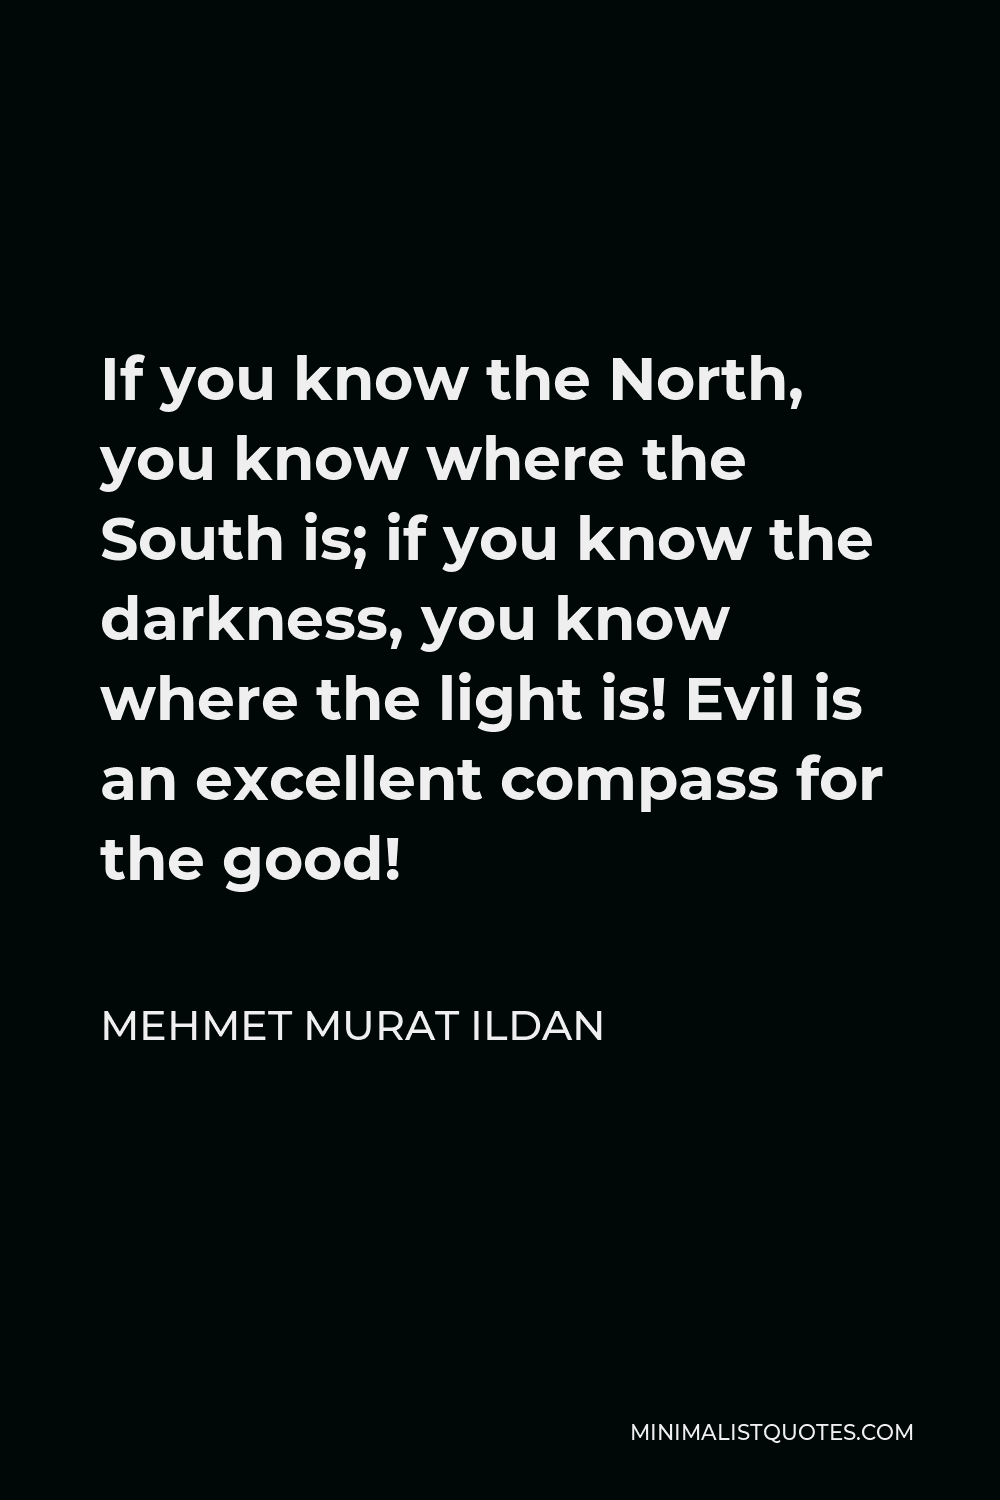 Mehmet Murat Ildan Quote - If you know the North, you know where the South is; if you know the darkness, you know where the light is! Evil is an excellent compass for the good!